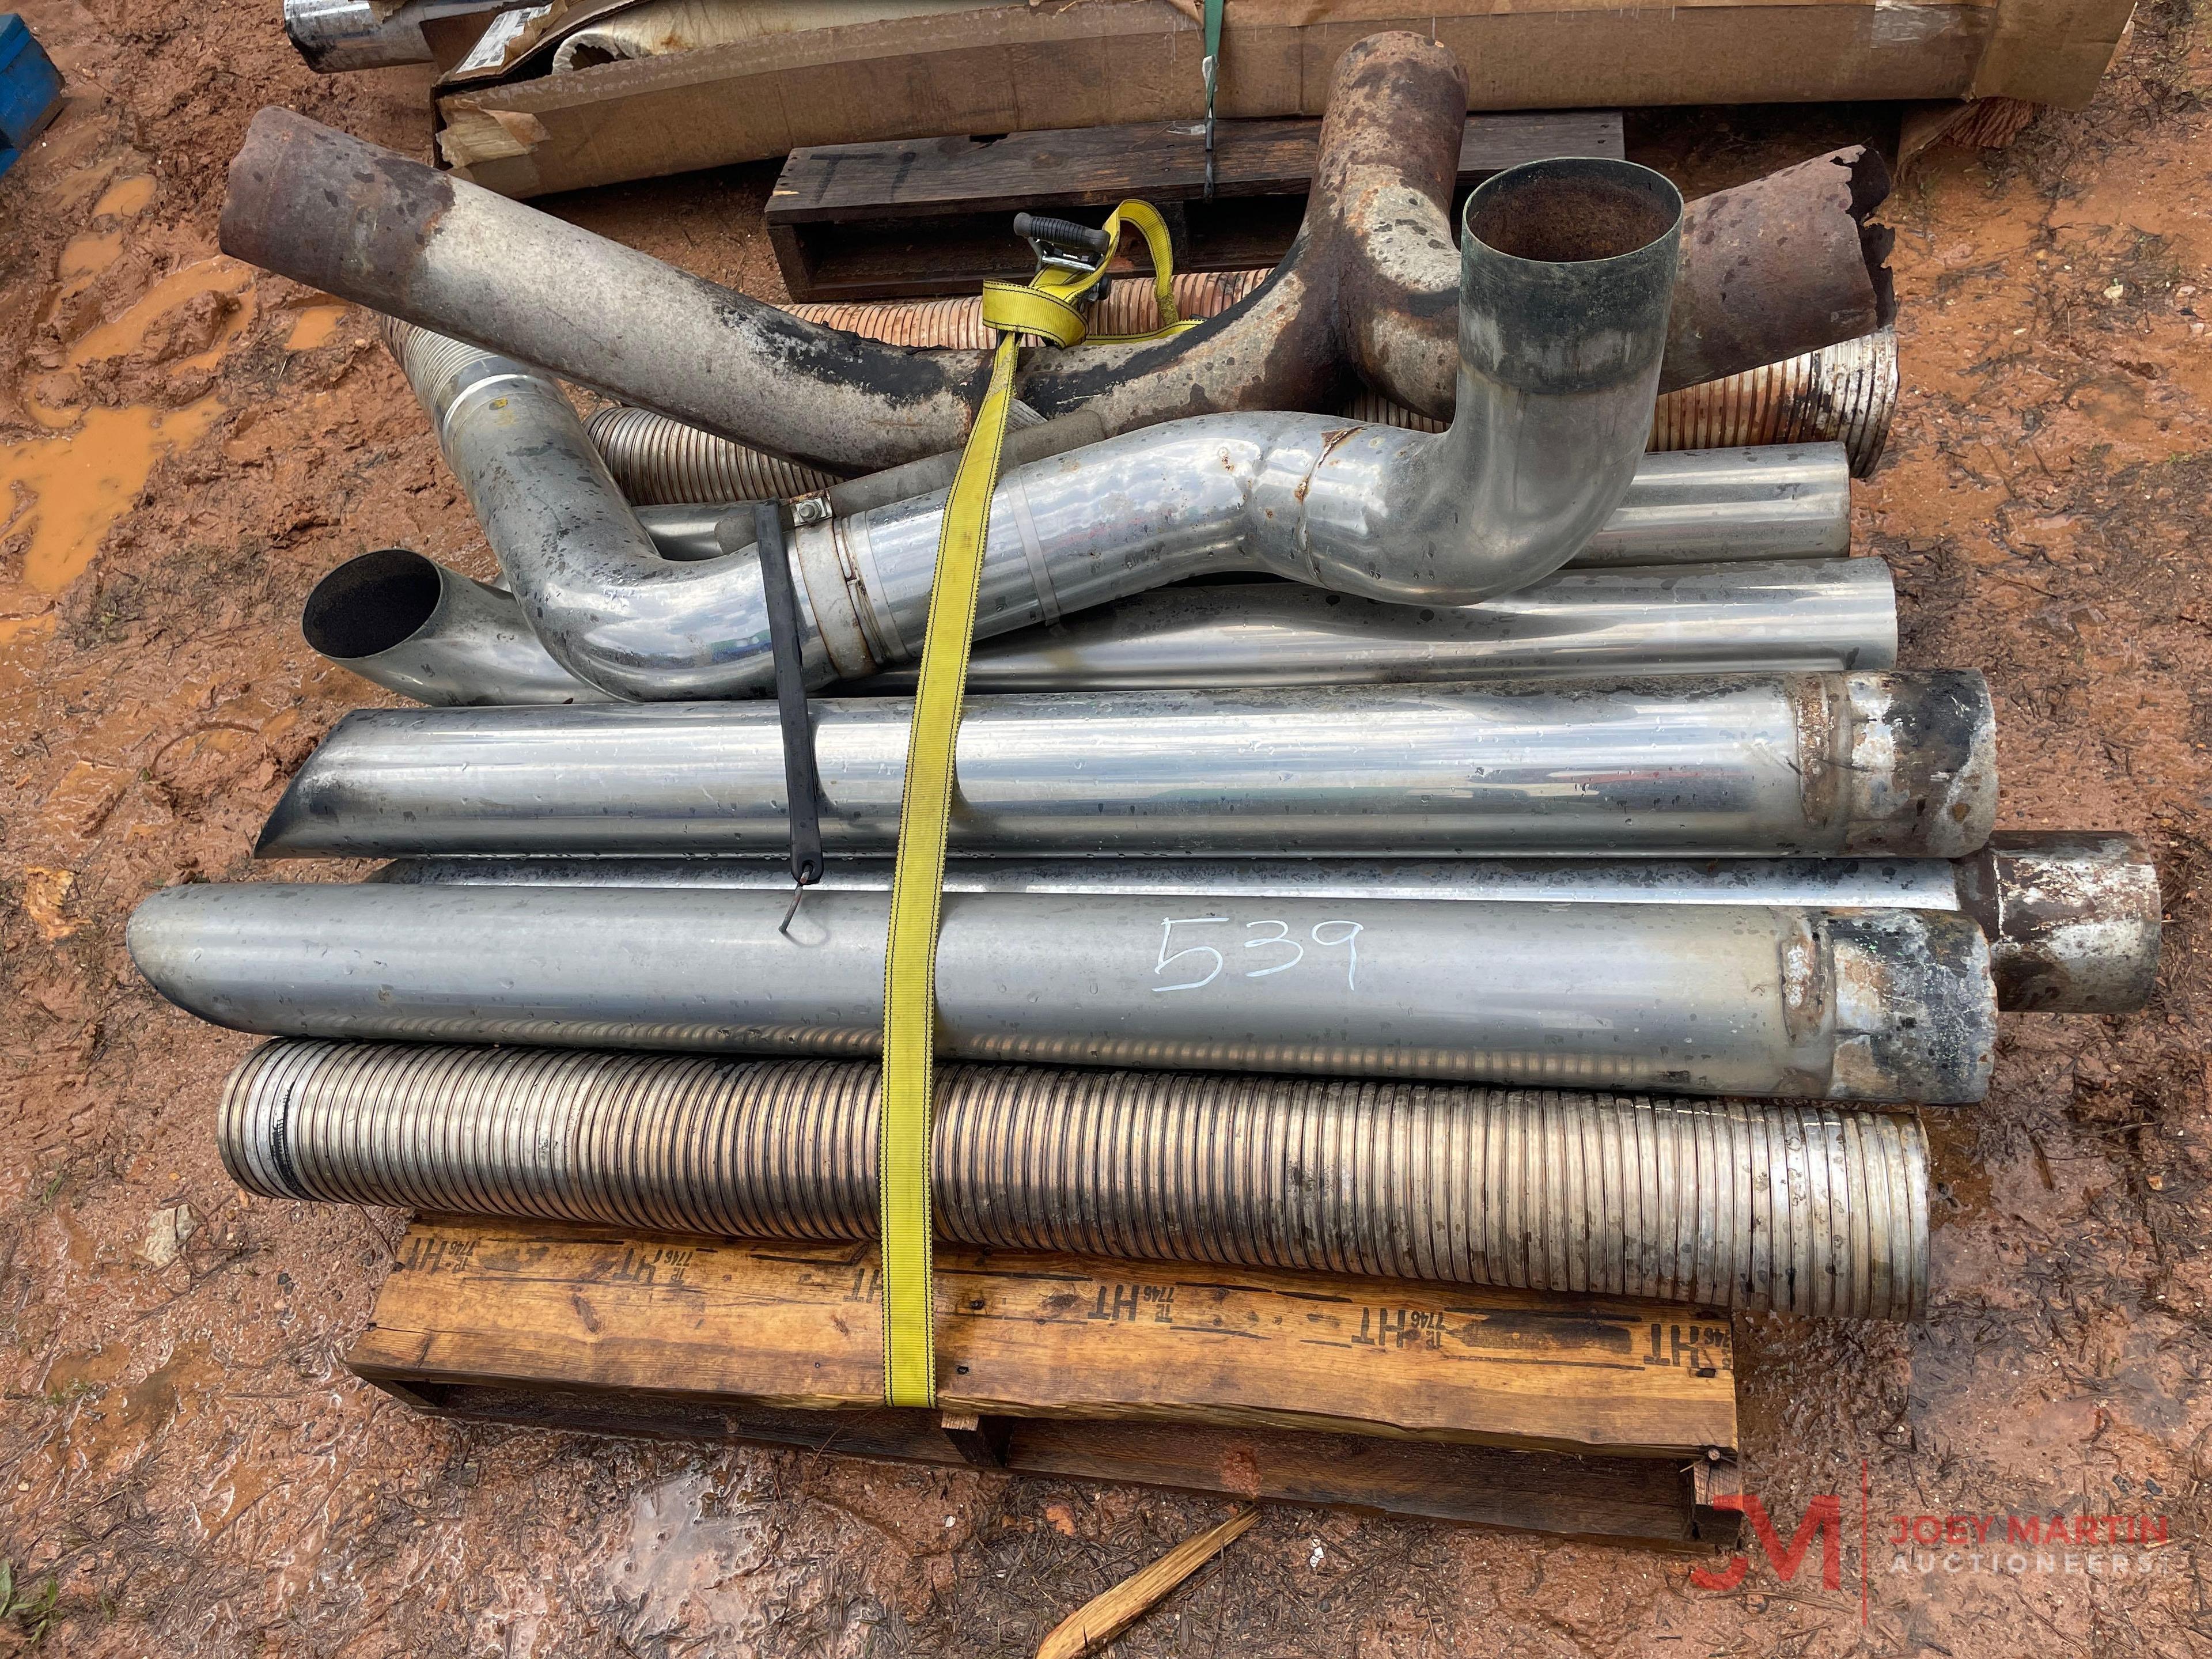 CONTENTS OF (2) PALLETS: 5" EXHAUST PIPE & FITTINGS